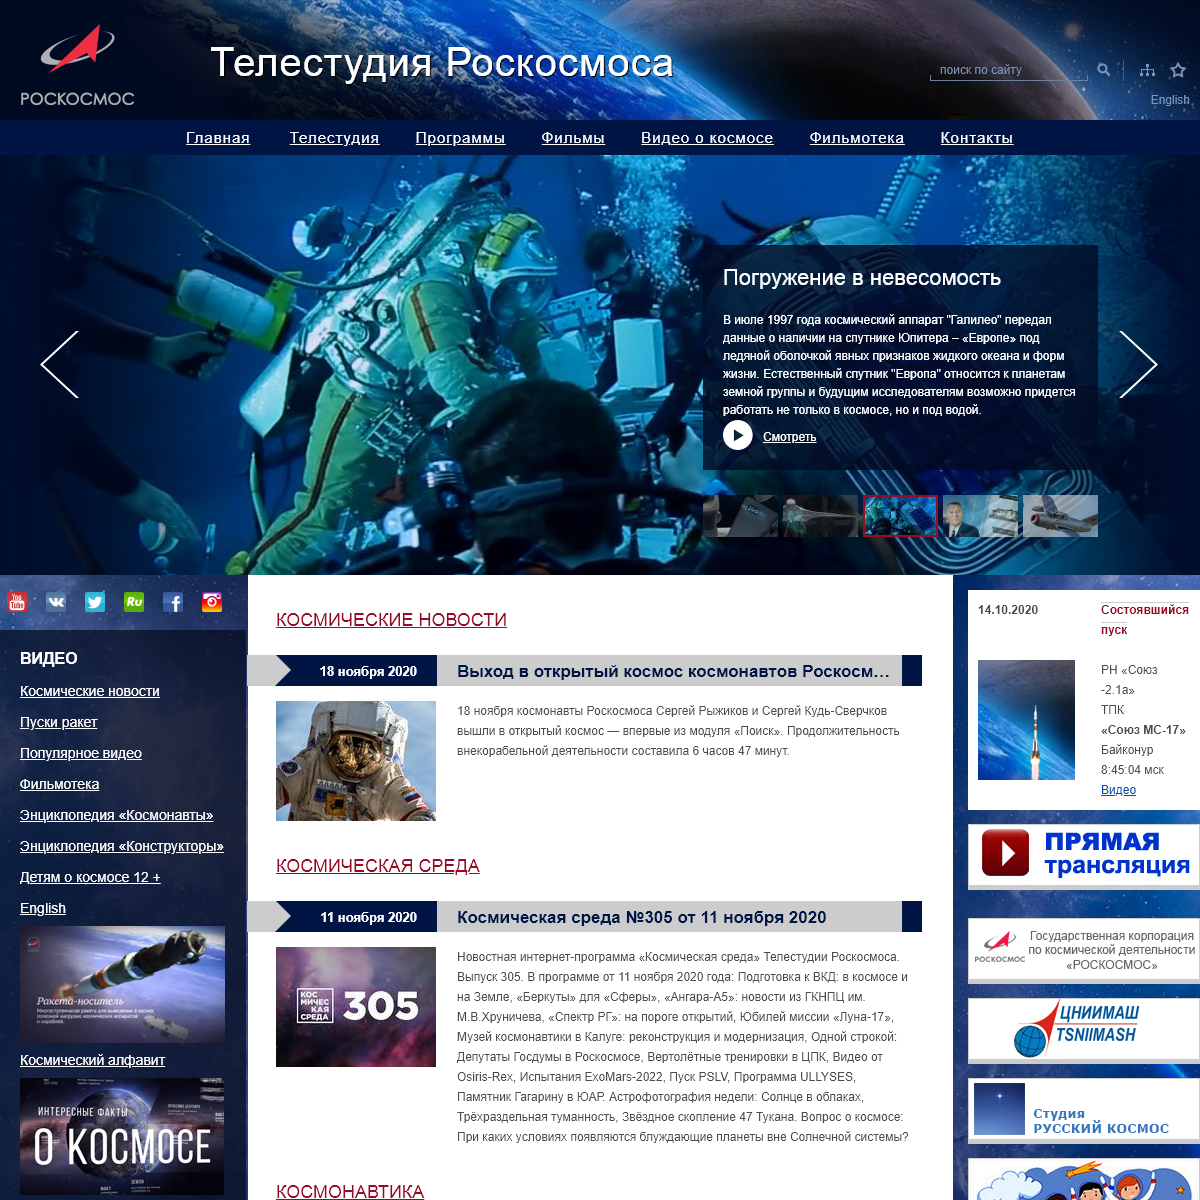 A complete backup of tvroscosmos.ru